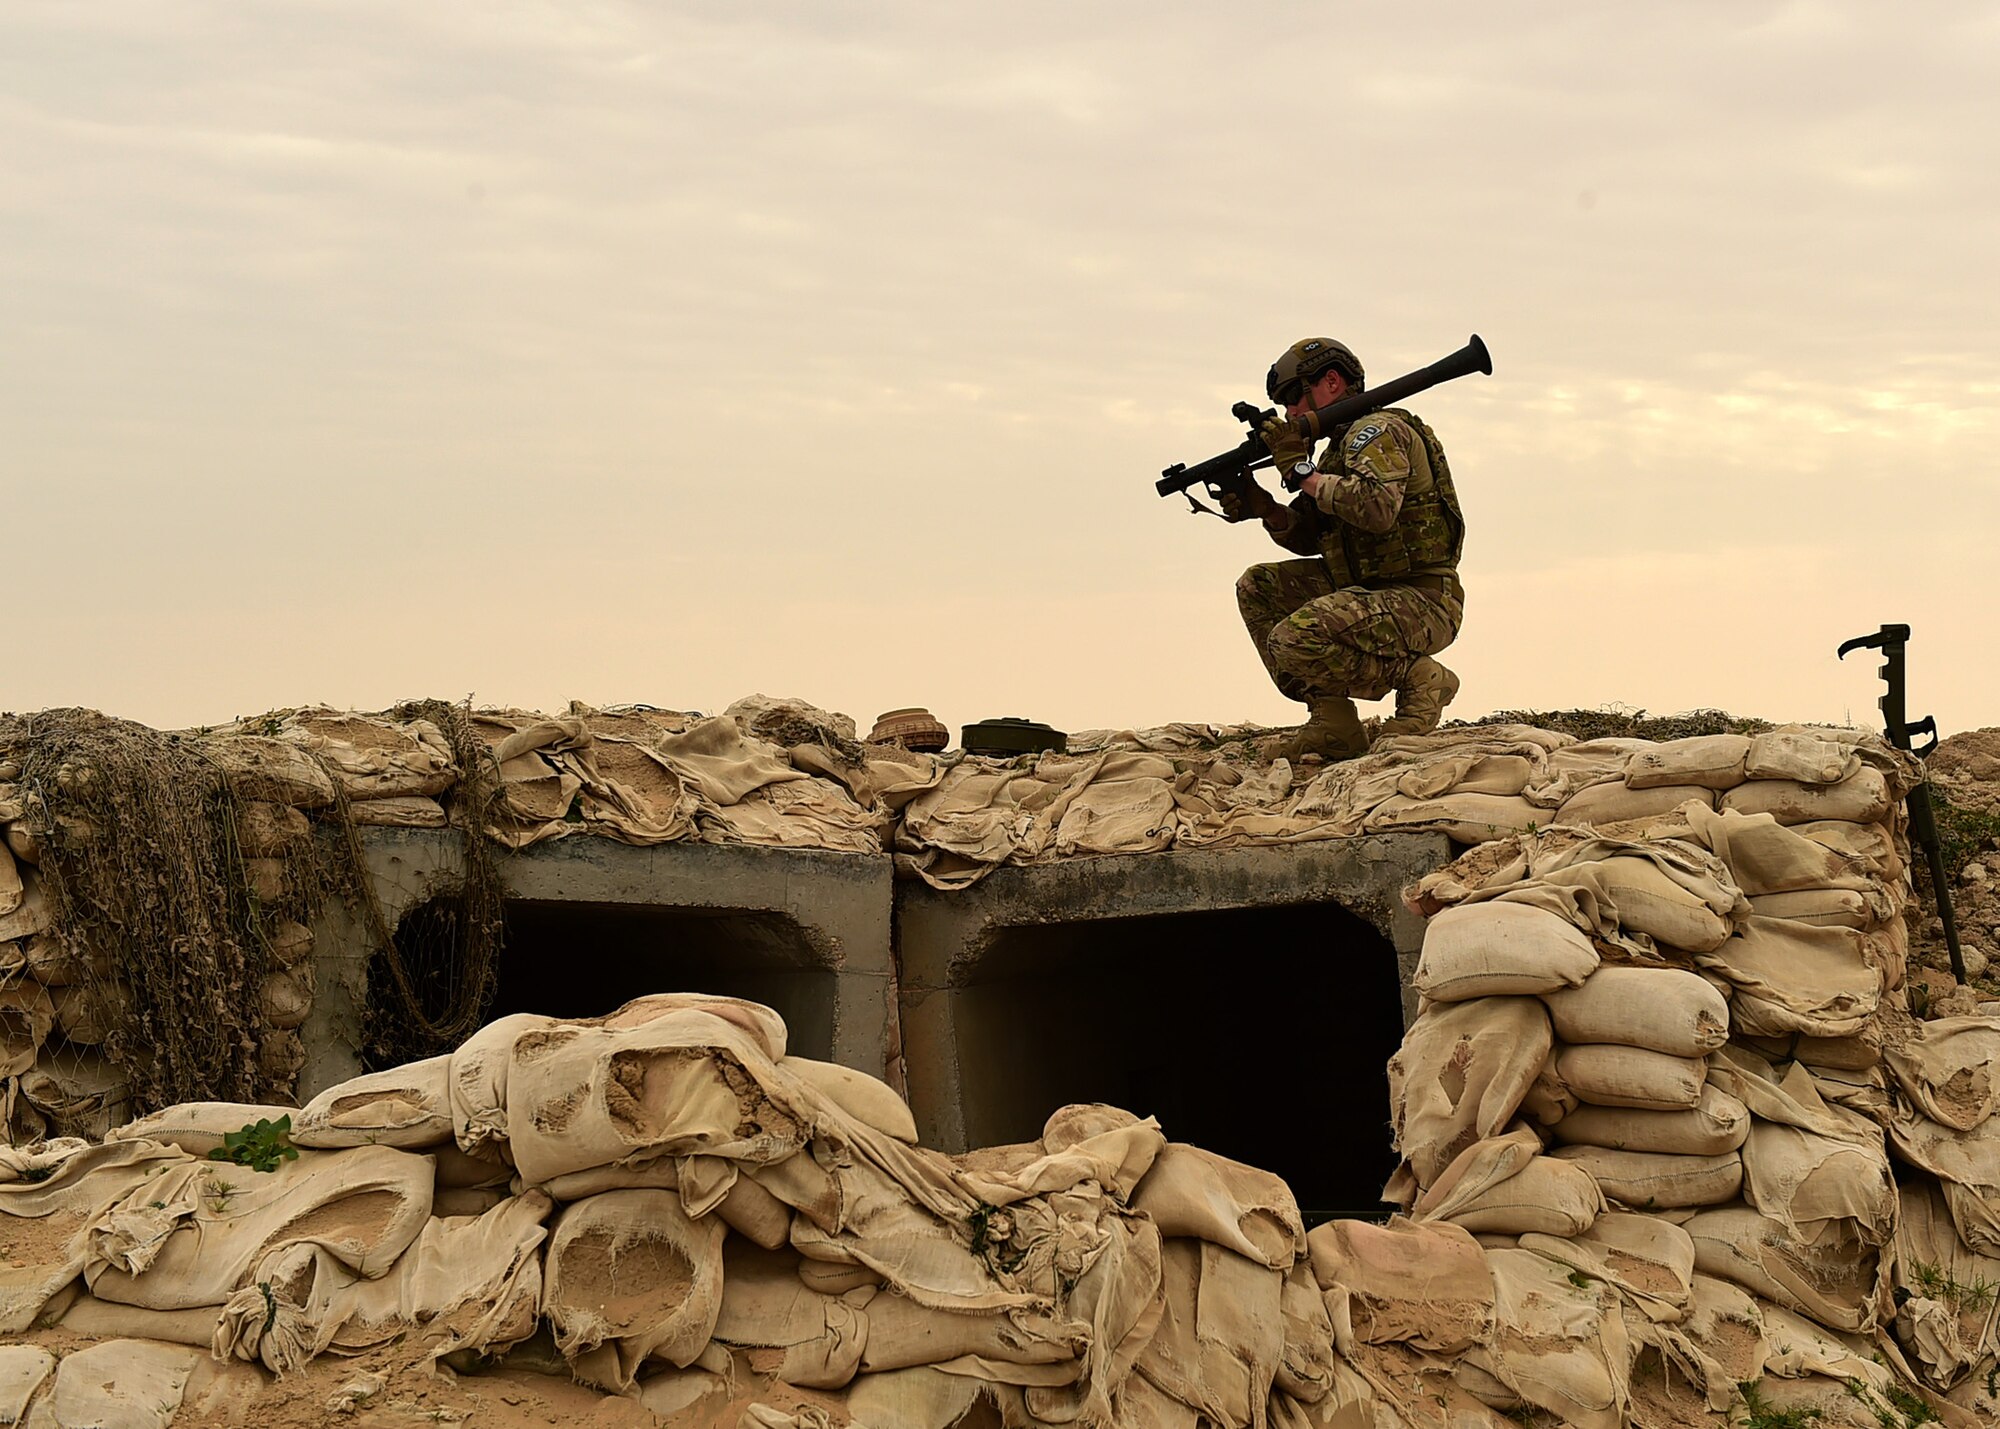 Staff Sgt. Andrew Croop, a 386th Air Expeditionary Wing explosive ordnance disposal technician, picks up a simulated rocket launcher during a joint EOD training exercise at an undisclosed location in Southwest Asia, Dec. 15, 2015. As part of the exercise, Croop conducted a manual sweep of a suspicious area in search of ordnances and secured the area. (U.S. Air Force photo by Staff Sgt. Jerilyn Quintanilla)